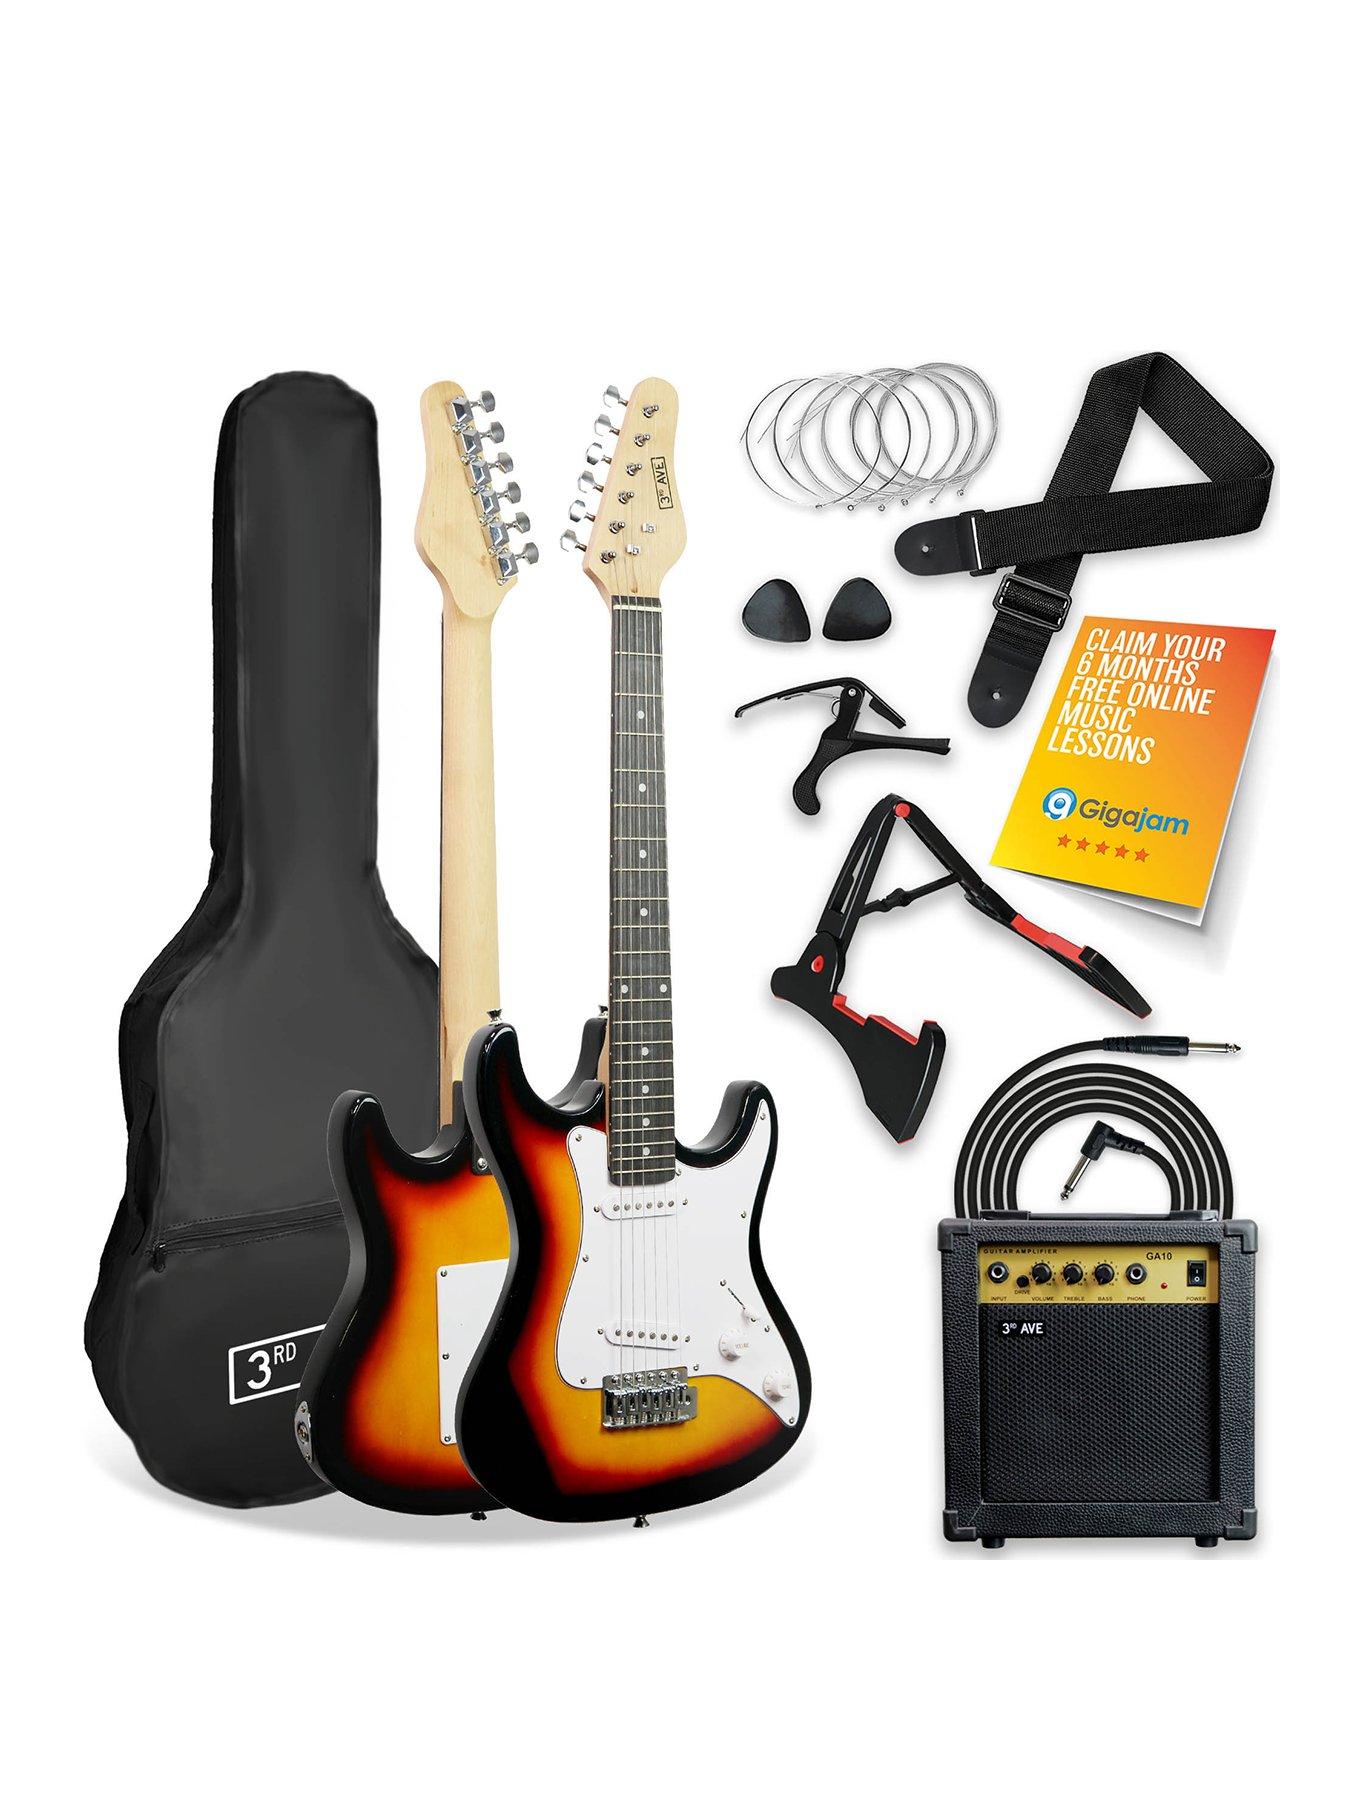 3Rd Avenue 3/4 Size Electric Guitar Ultimate Kit With 10W Amp - 6 Months Free Lessons - Sunburst